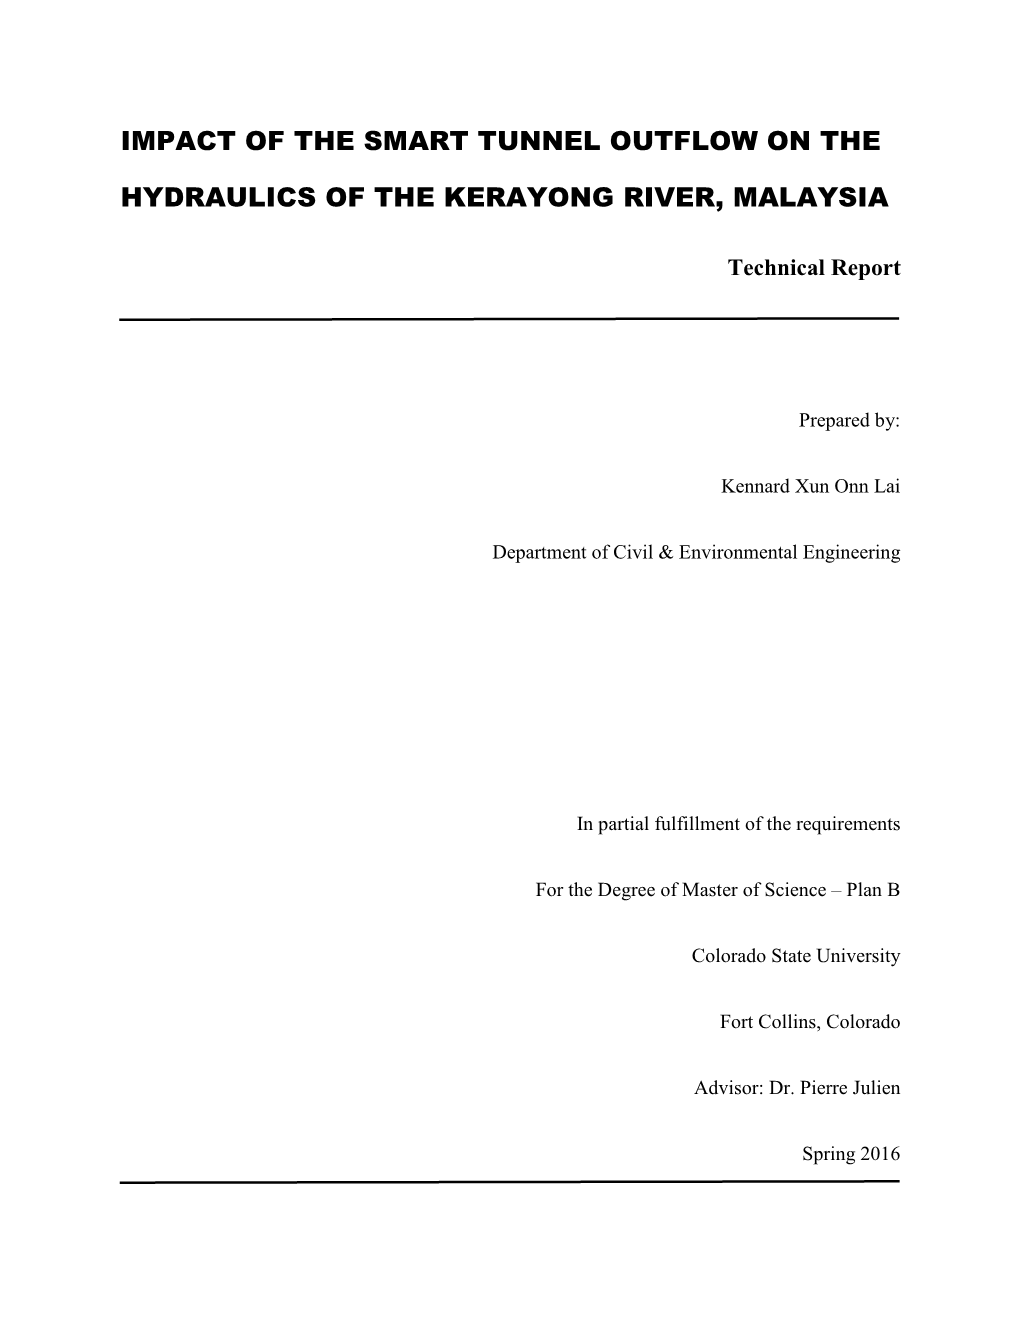 Impact of the Smart Tunnel Outflow on the Hydraulics of the Kerayong River